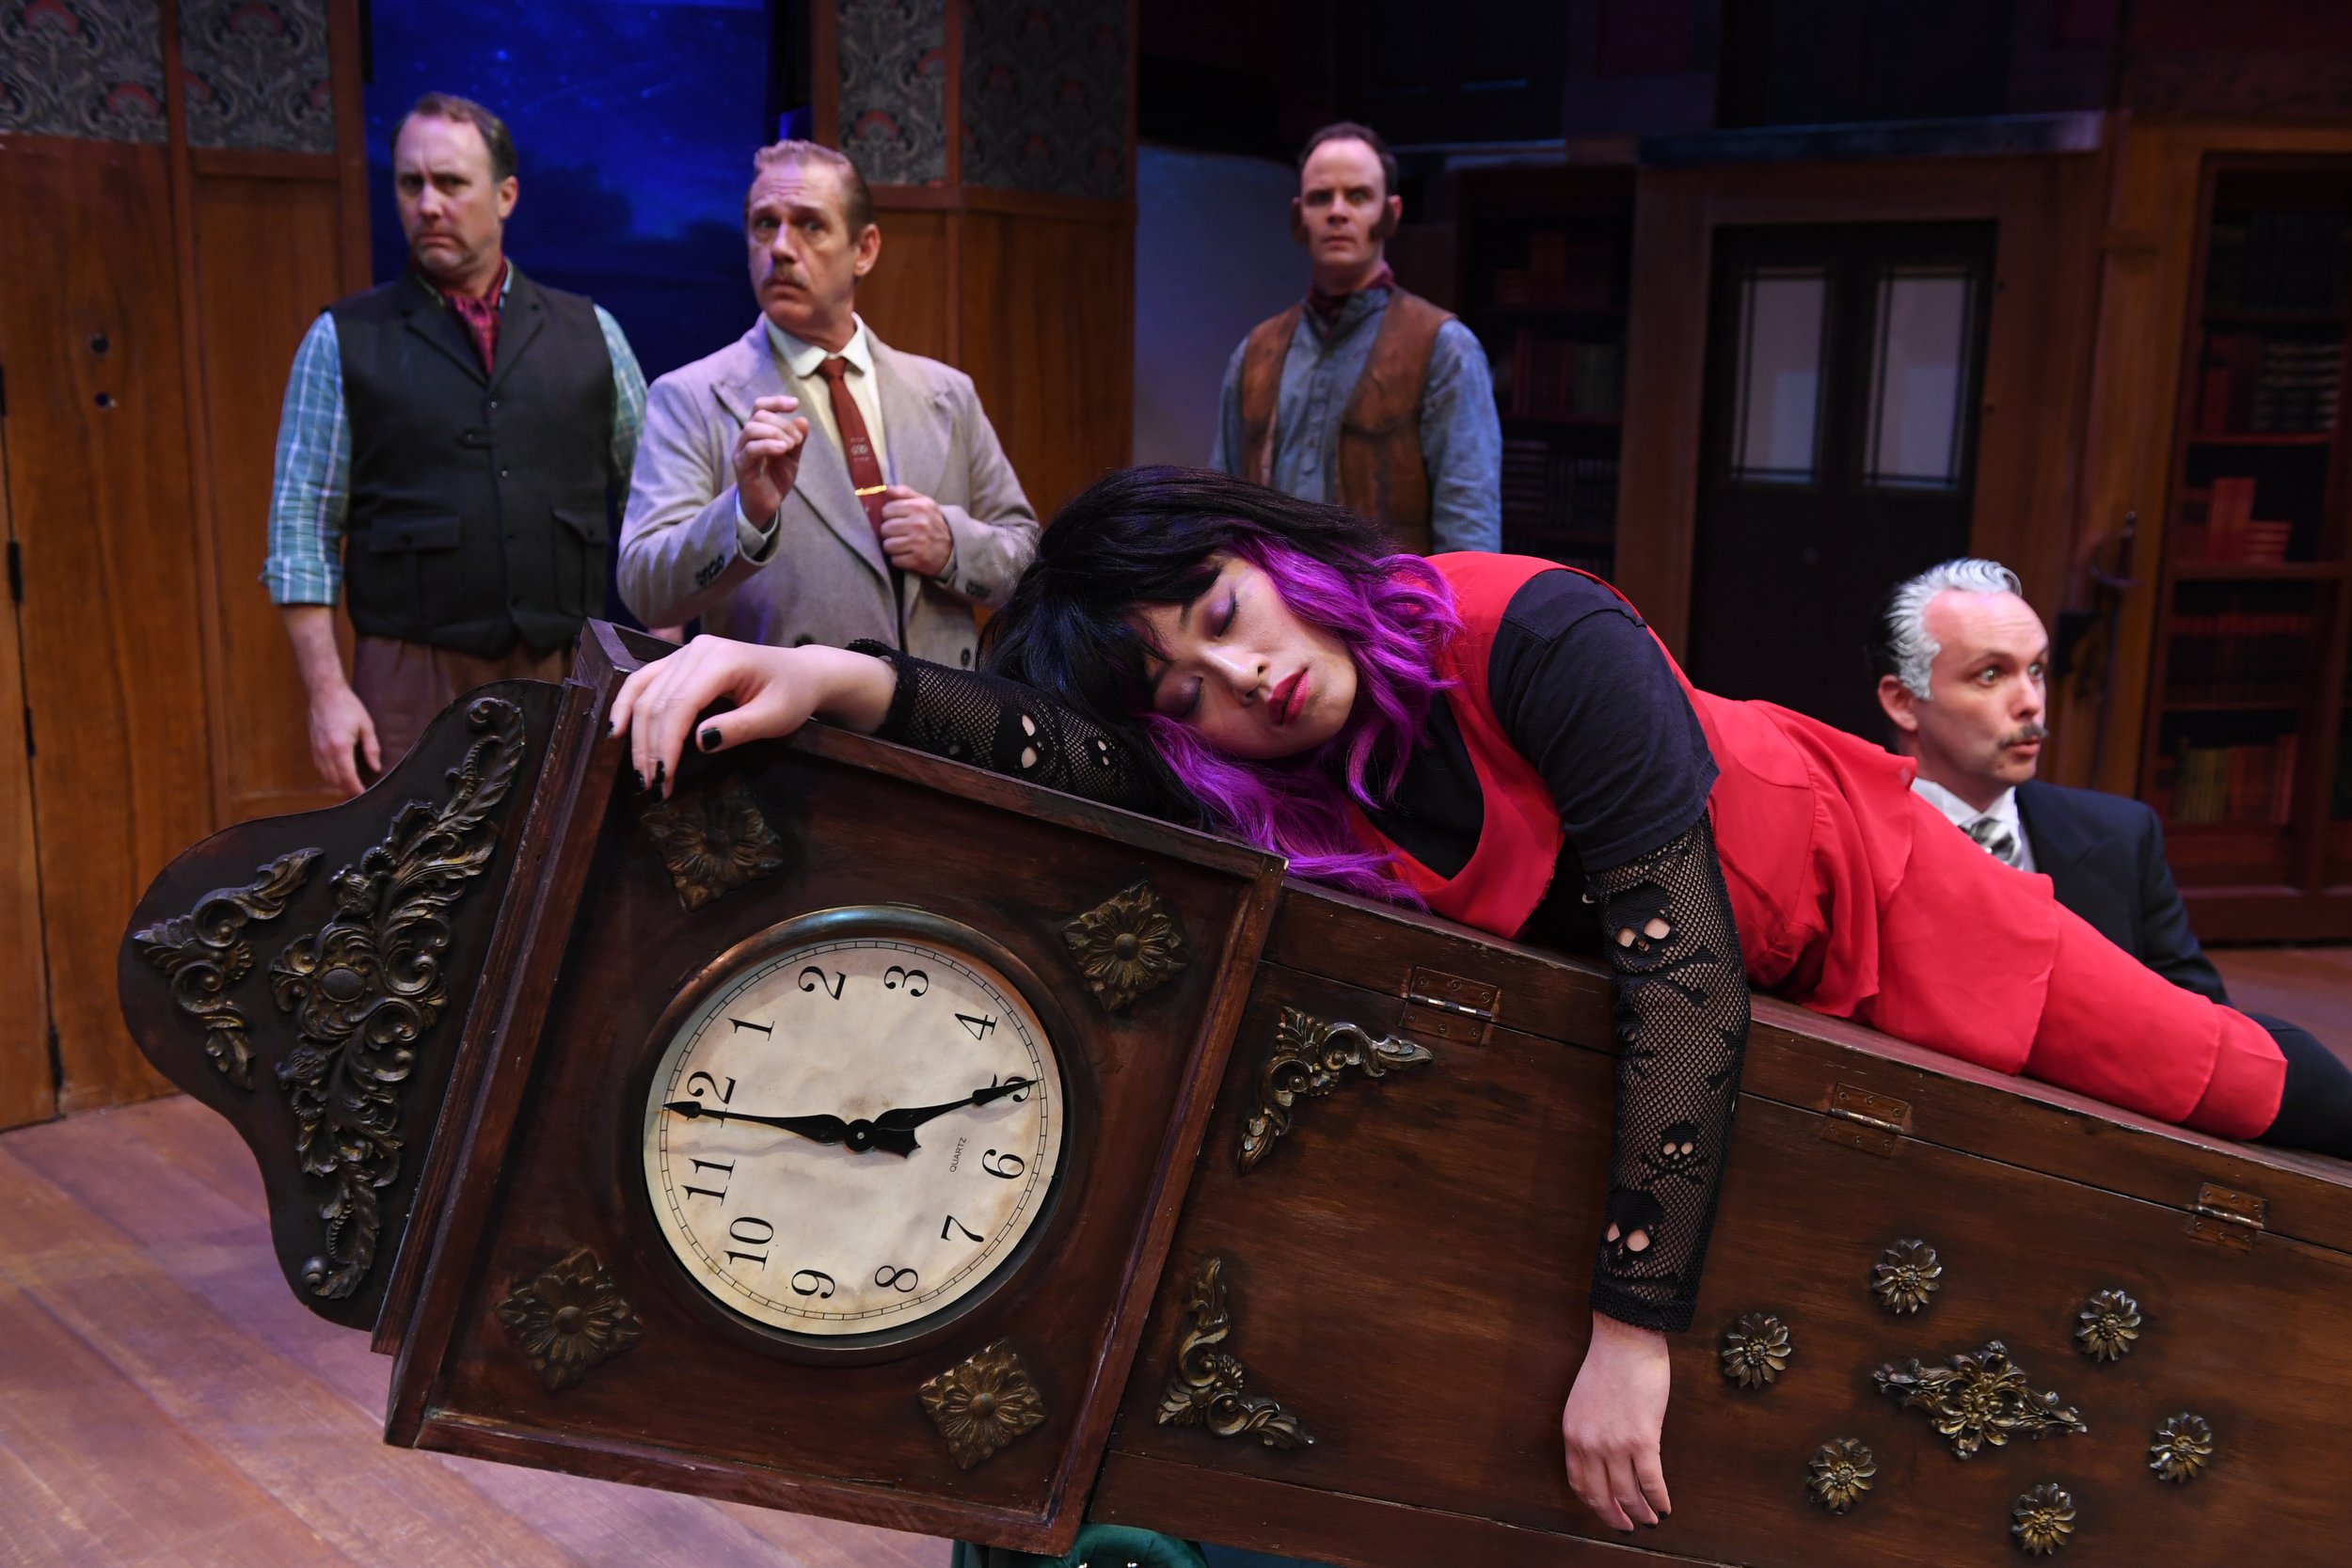    (left to right)&nbsp;WILL SPRINGHORN JR.*, JONATHAN RHYS WILLIAMS, SEAN OKUNIEWICZ*, KEITH PINTO*, and VIVIENNE TRUONG (front)      Credit: Dave Lepori      Photos for&nbsp;San Jose Stage Company’s production of THE PLAY THAT GOES&nbsp; WRONG by H